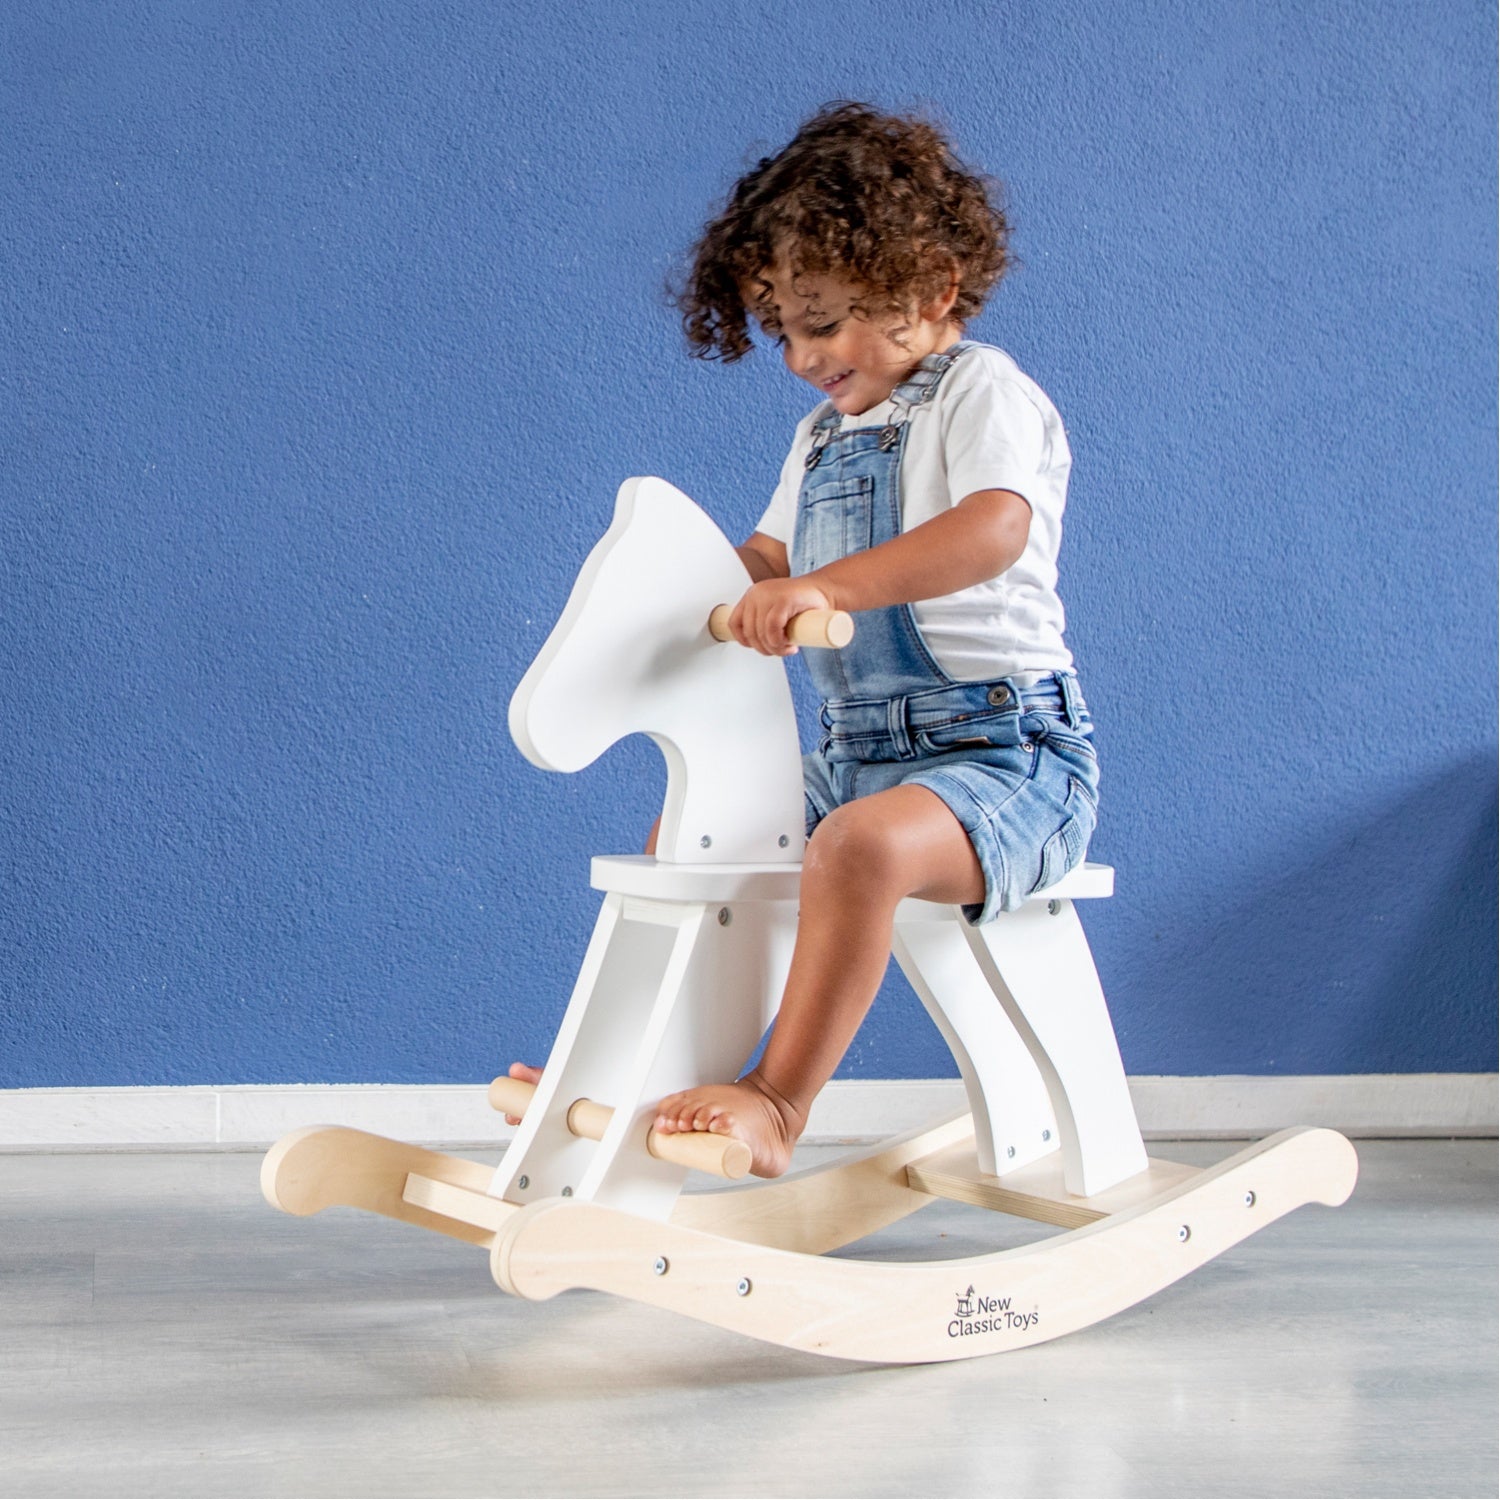 New Classic Toys Wooden Rocking Horse | White | Toddler Activity Wooden Toy | Lifestyle – Child Riding Horse | BeoVERDE Ireland